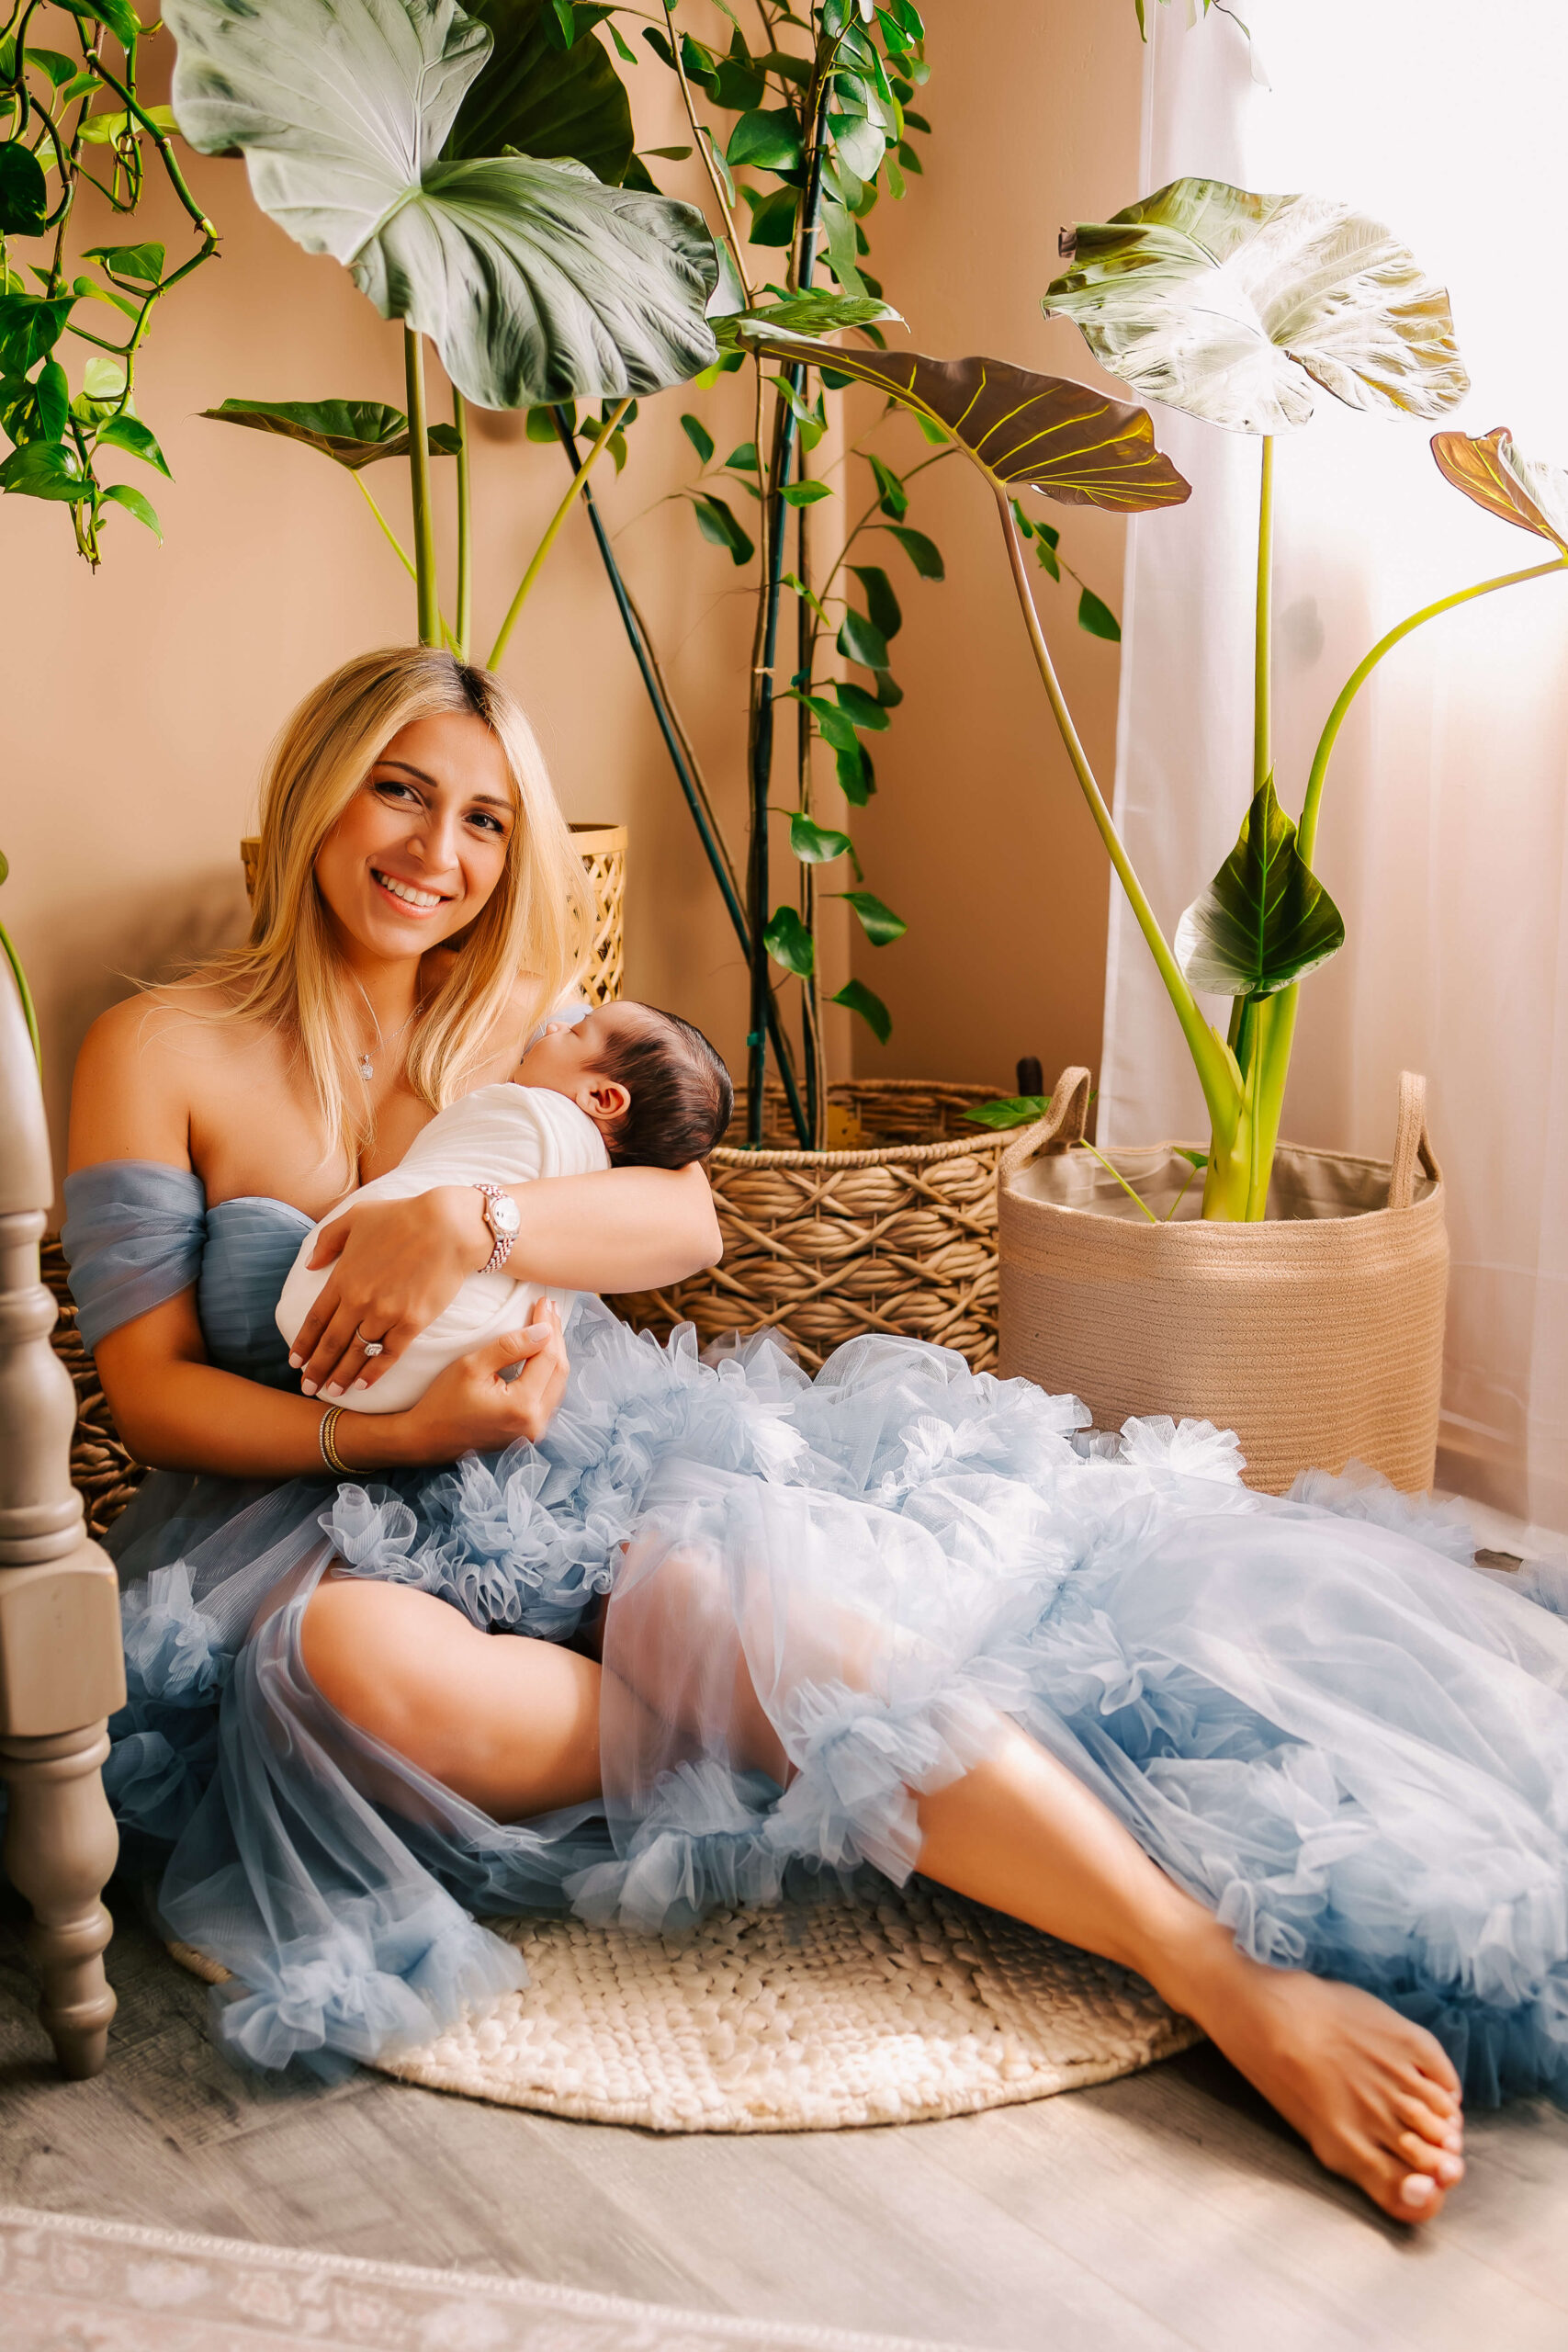 Mom sitting on floor next to bed holding her baby and smiling looking at camera during newborn lifestyle session in Orange County CA studio by Ashley Nicole Photography.